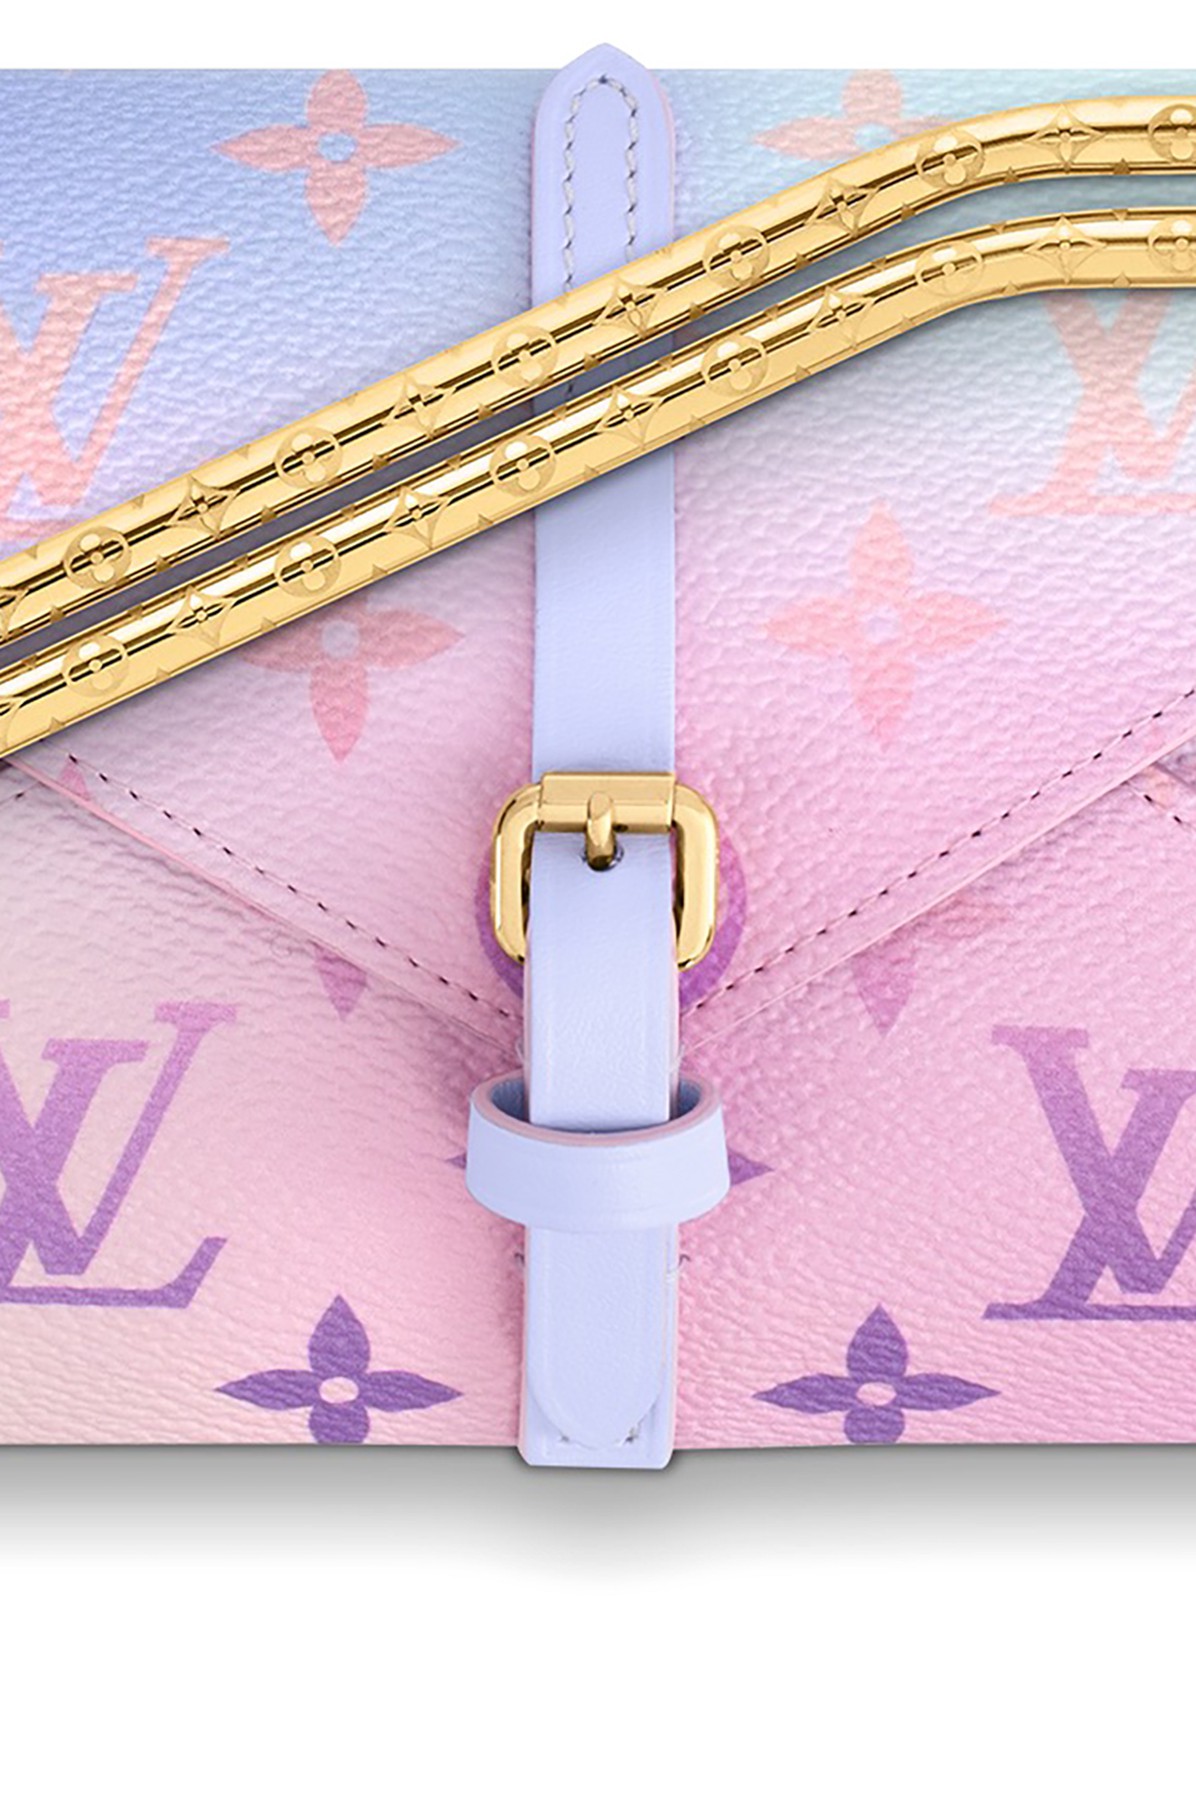 Louis Vuitton Straws and Pouch - Realry: Your Fashion Search Engine